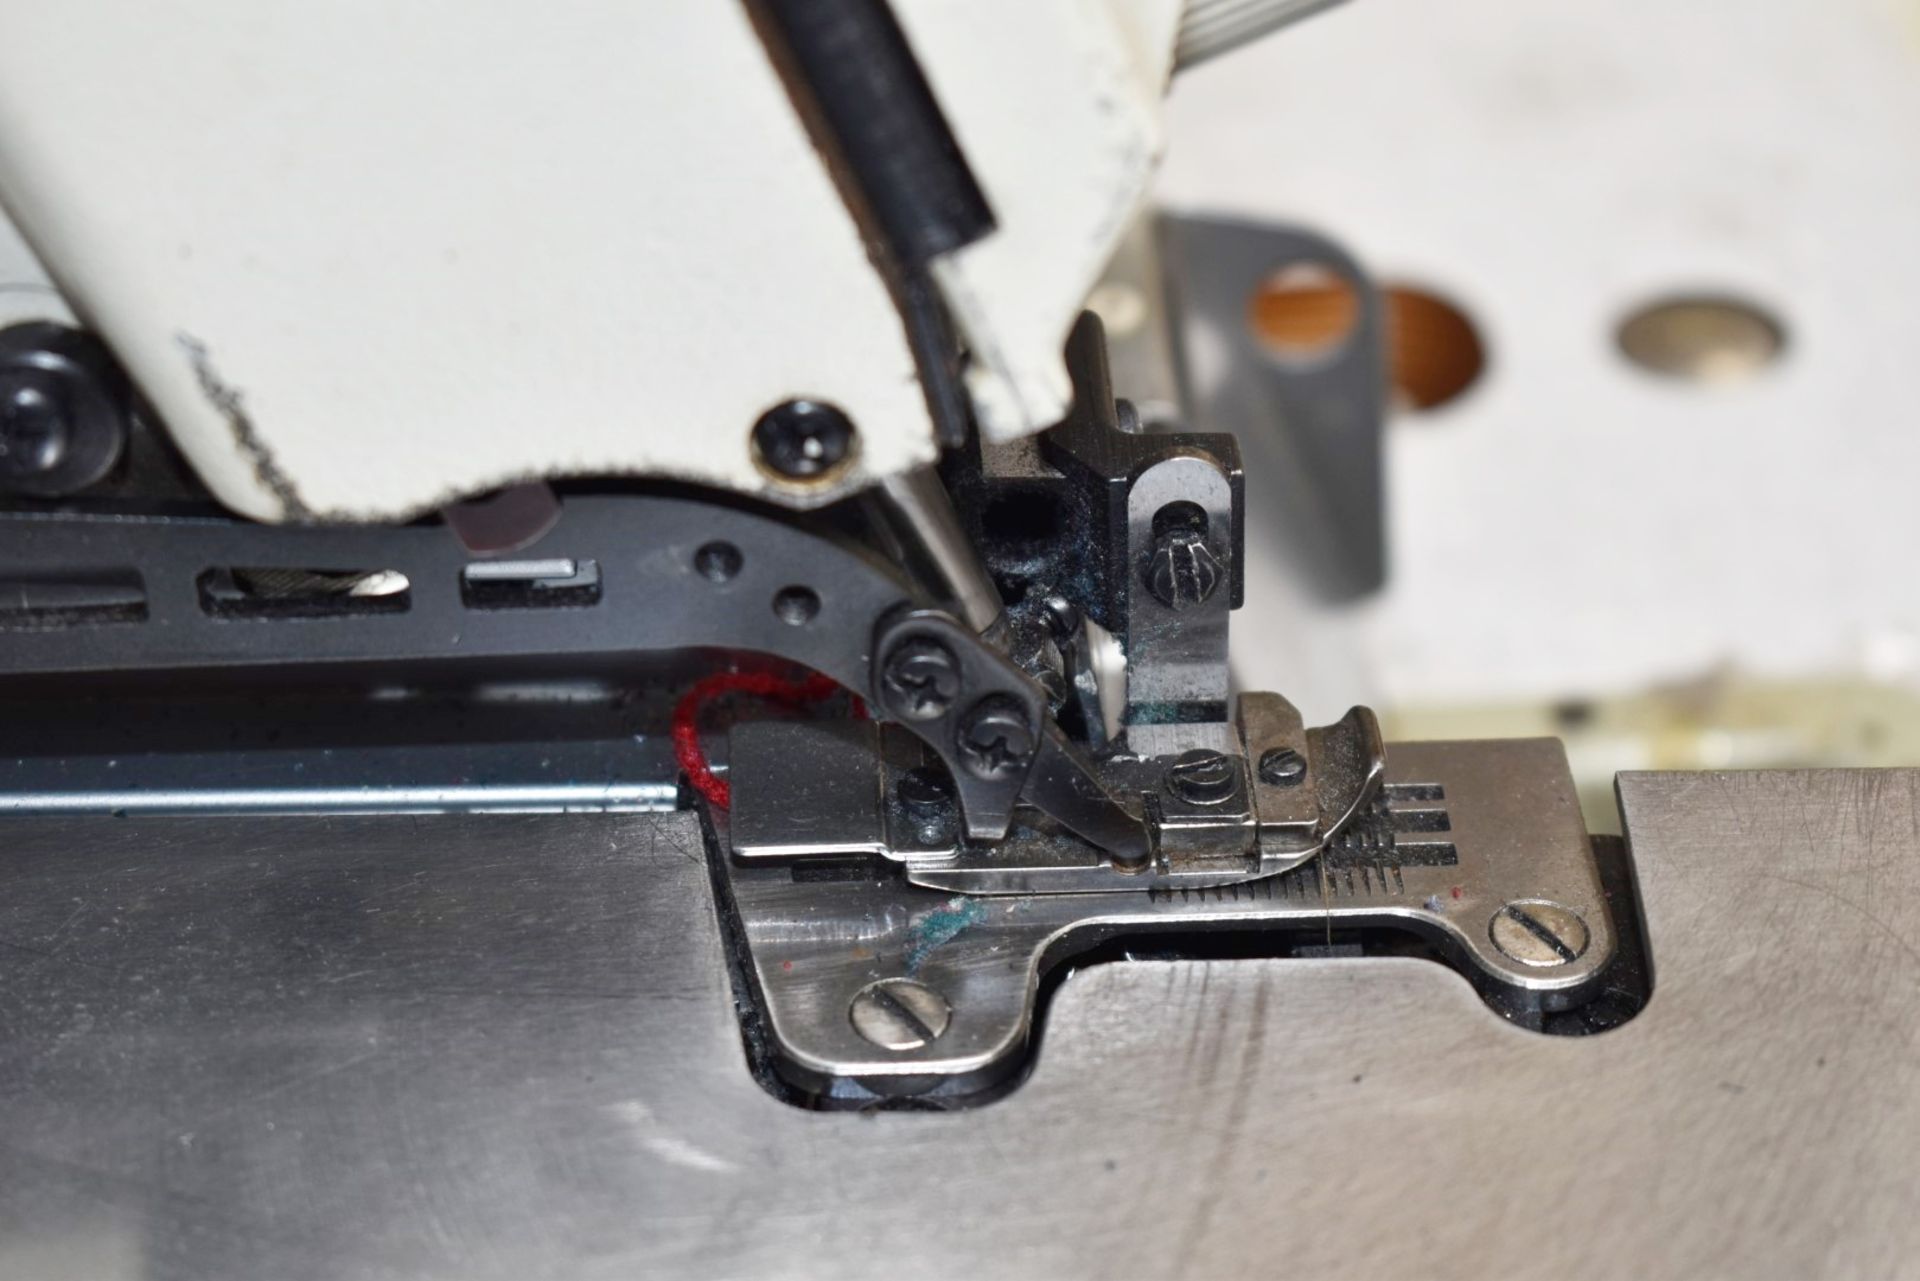 1 x Brother Overlock Industrial Sewing Machine - Model EF4-B531 - Image 17 of 27